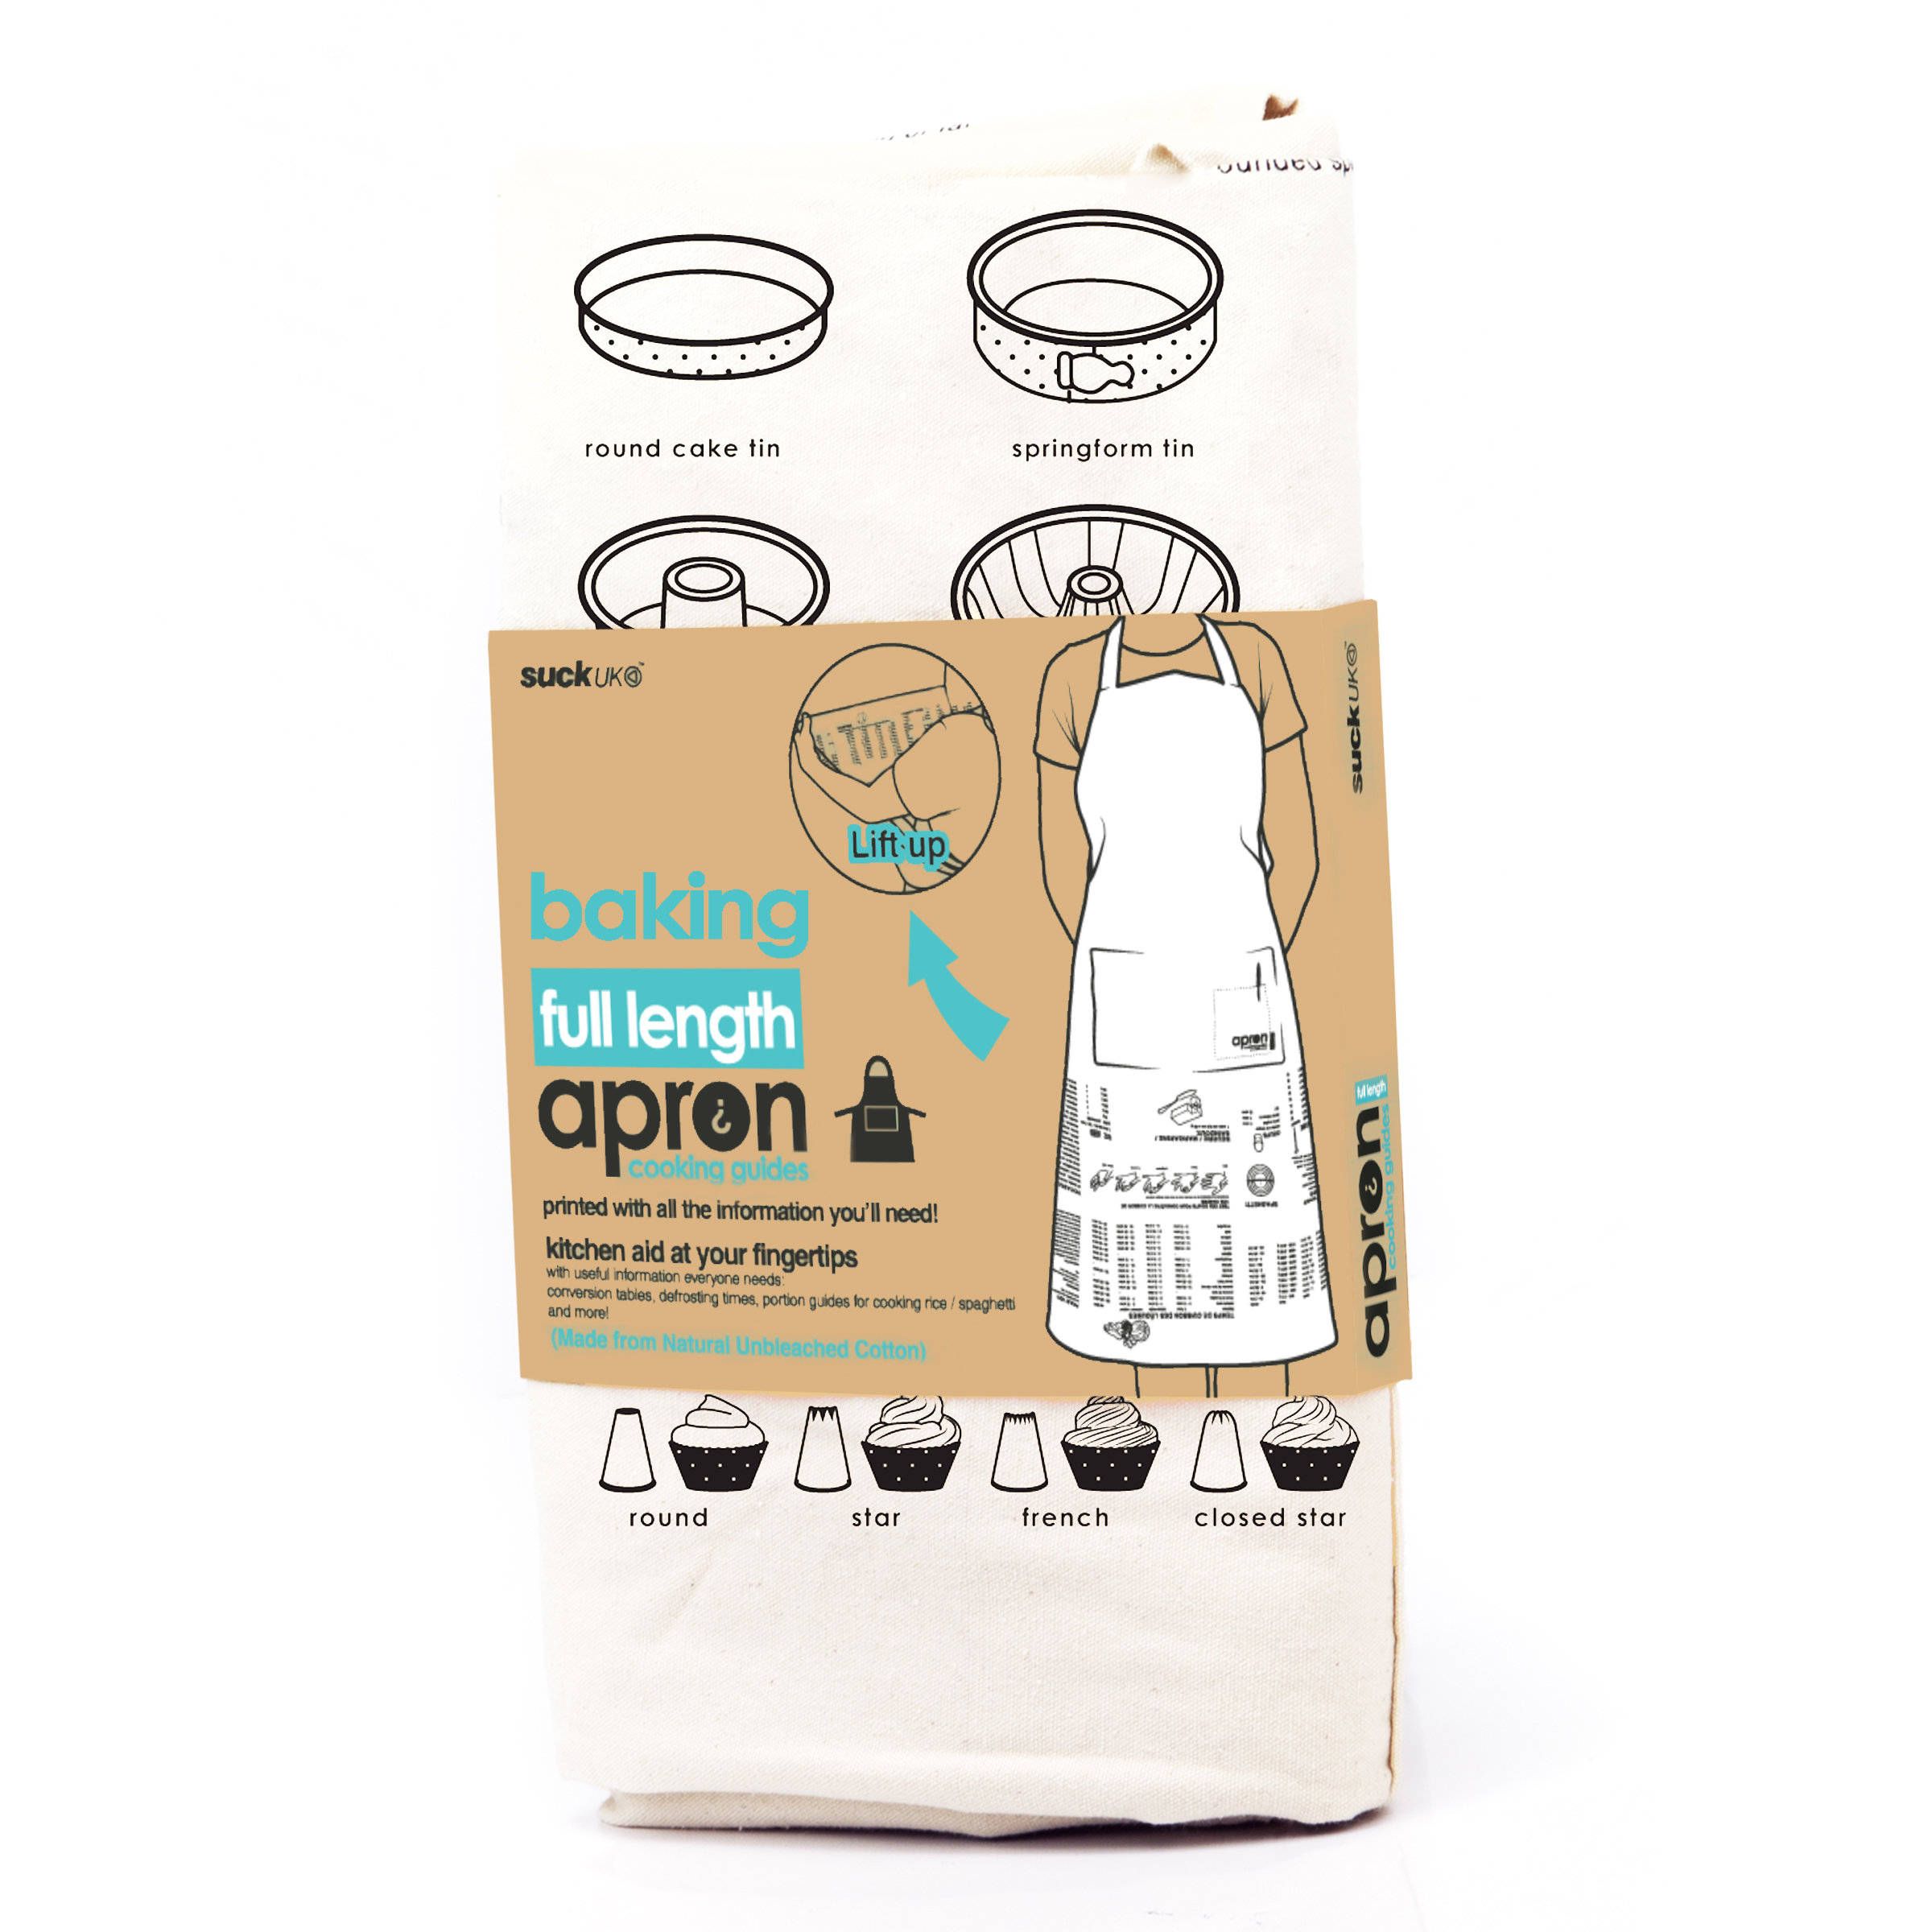 Nice Packaging for Aprons